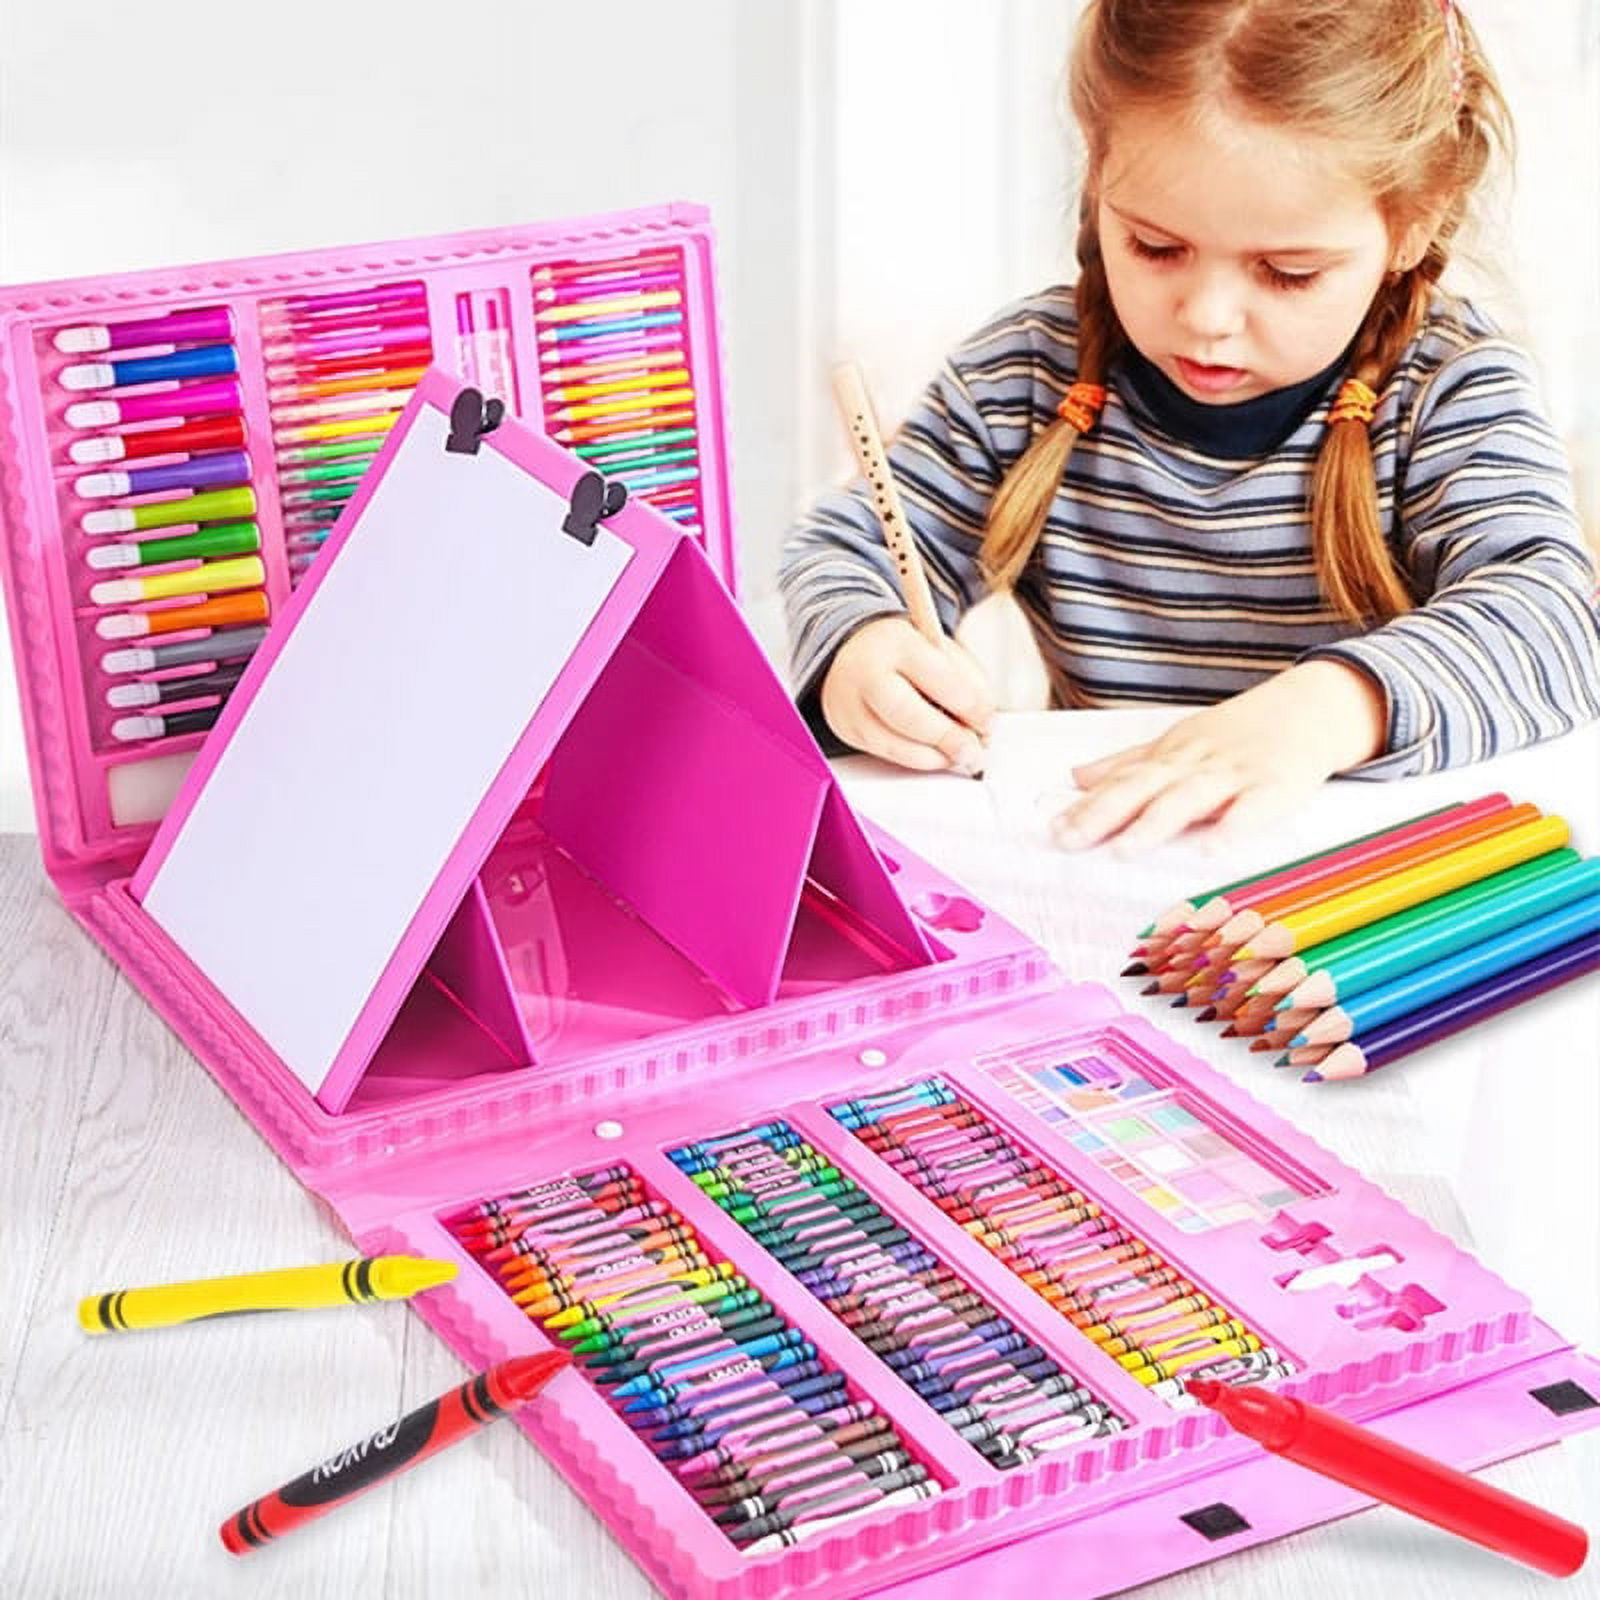 H & B 208-Piece Drawing kit for Kids, Deluxe Artist Set,Double Sided  Trifold Easel Art Set with Oil Pastels, Crayons, Colored Pencils, Markers,  Great Gift for Kids 3-12, Girls, Boys, Beginners, Pink 